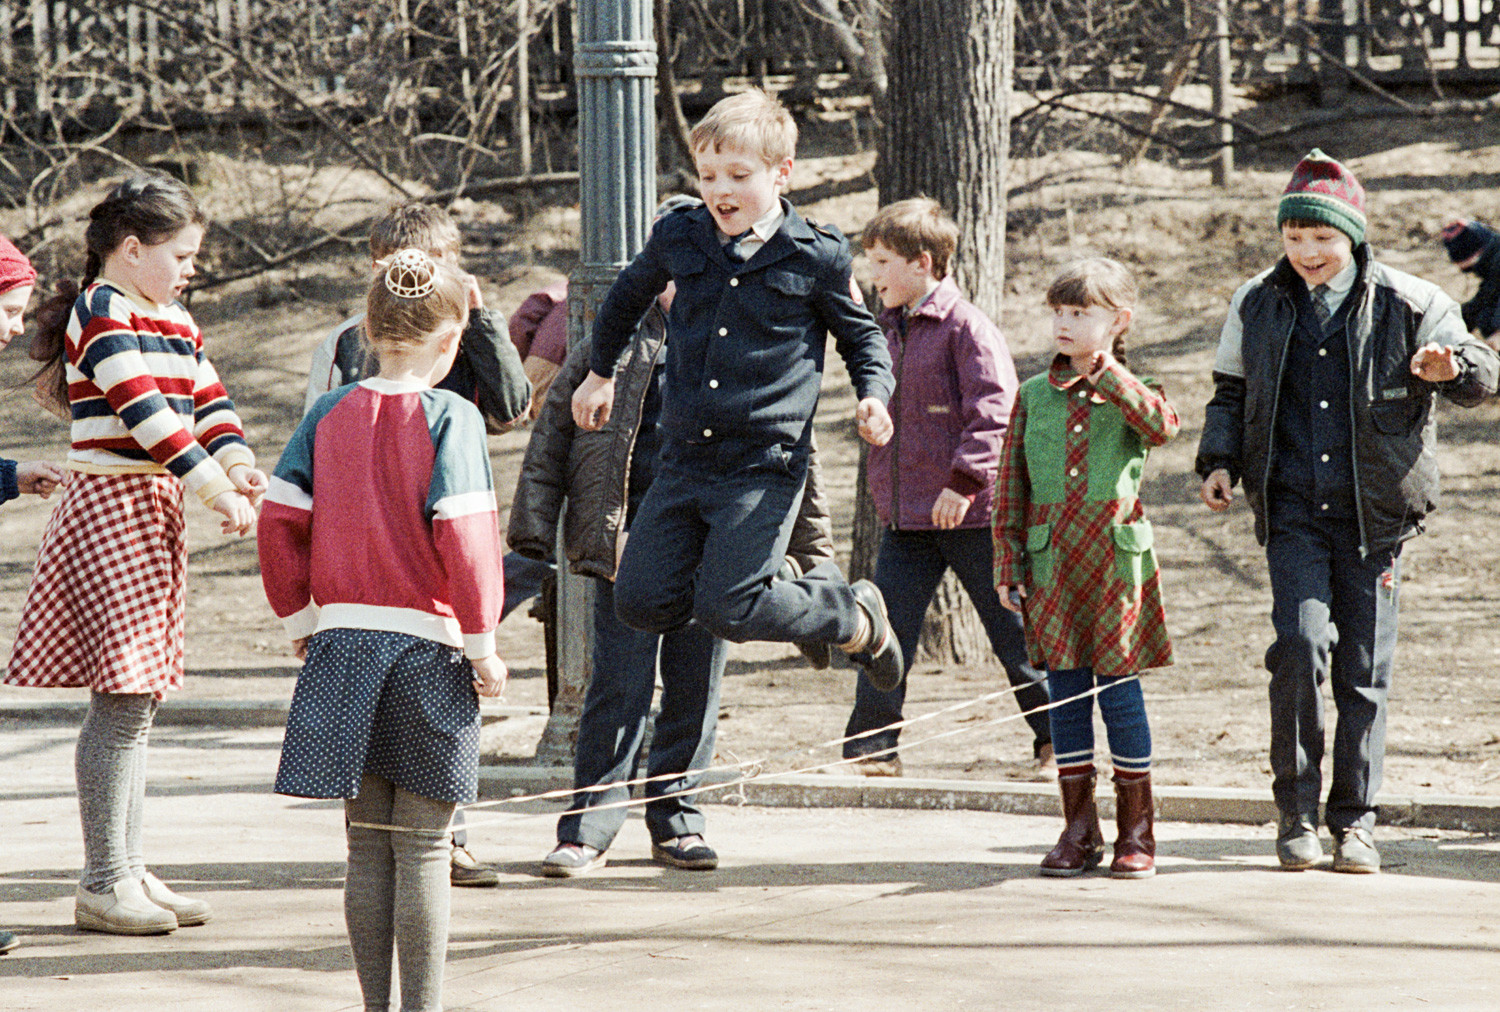 Kids after classes at Gogol Boulevard, Moscow. April 1988. 